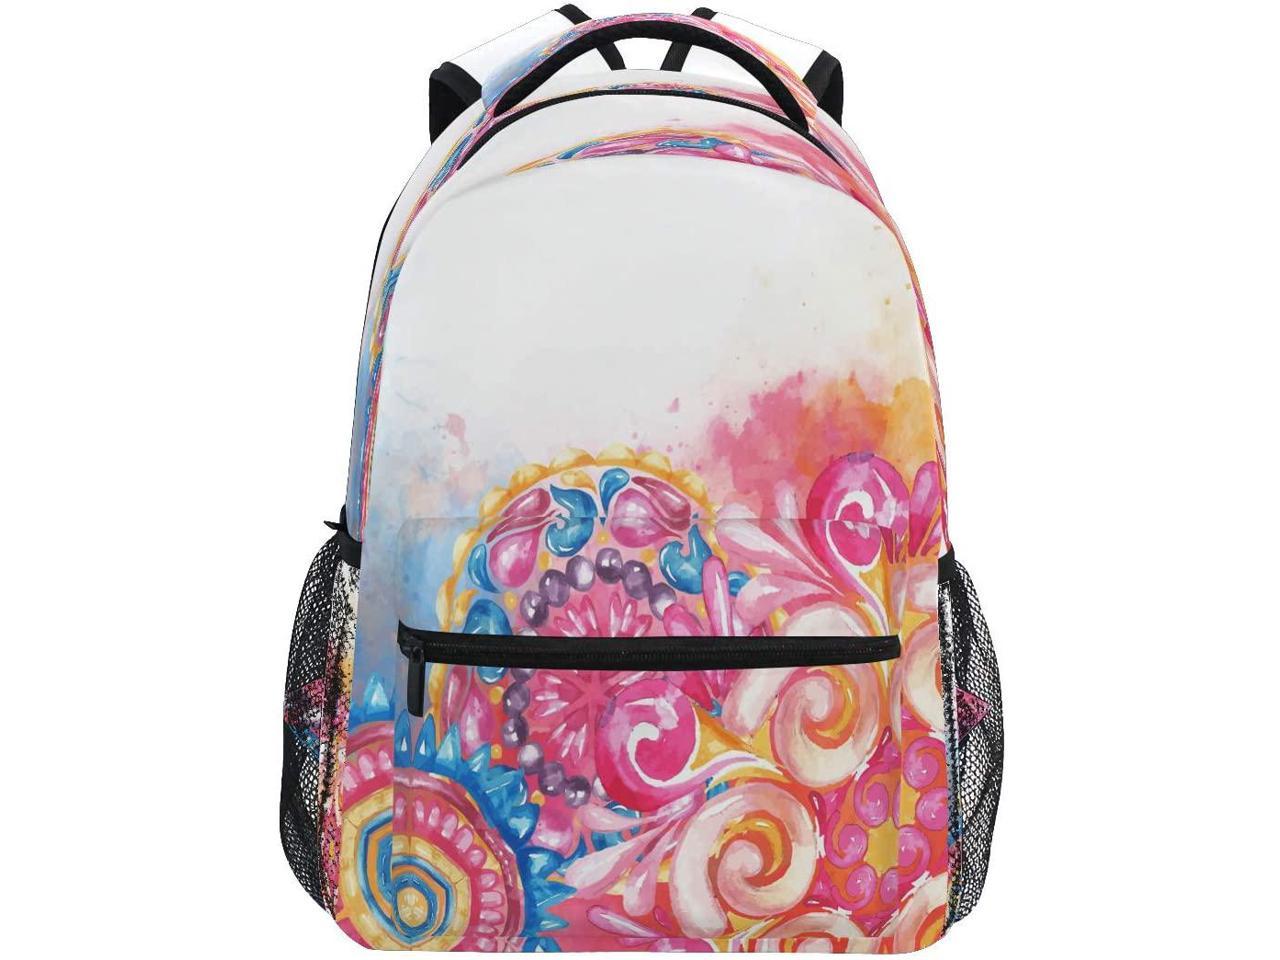 Wildflower Peony Watercolor School Bookbags Computer Daypack for Travel Hiking Camping Laptop Backpack Boys Grils